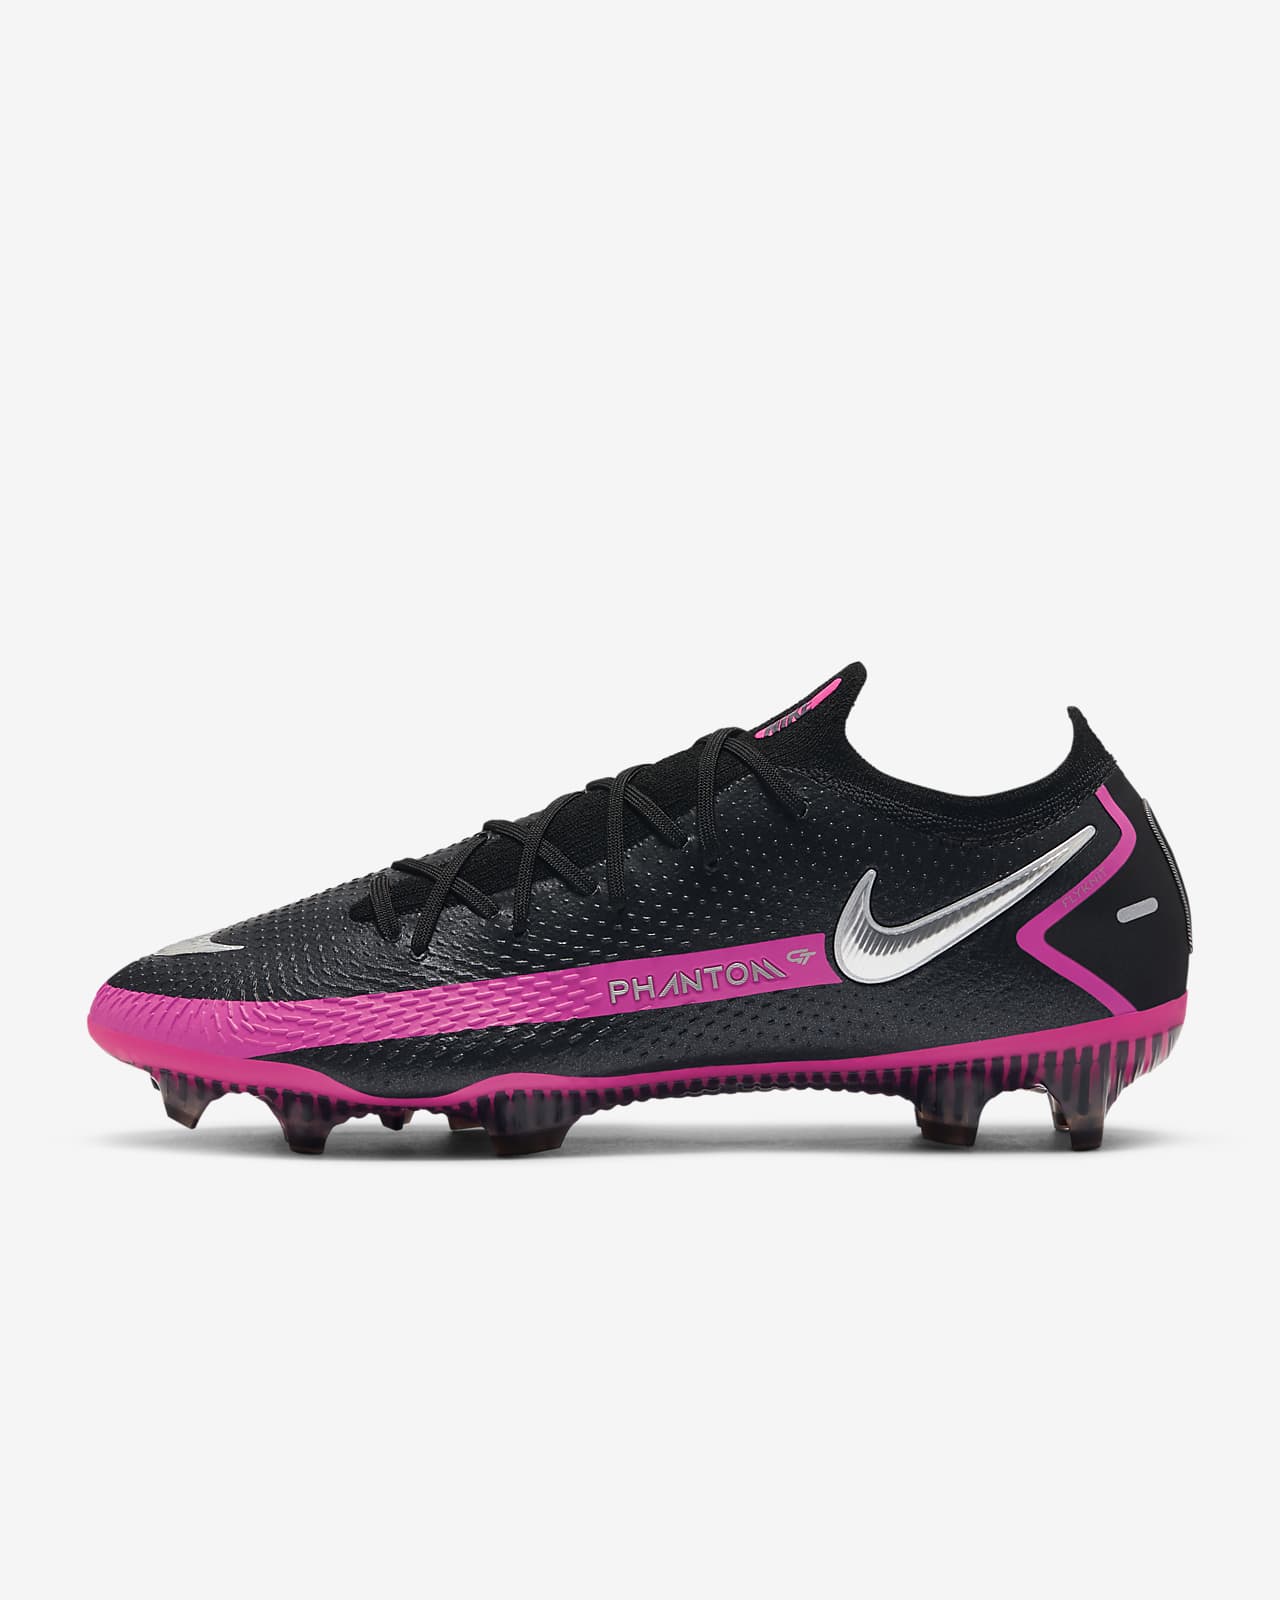 nike football boots without studs